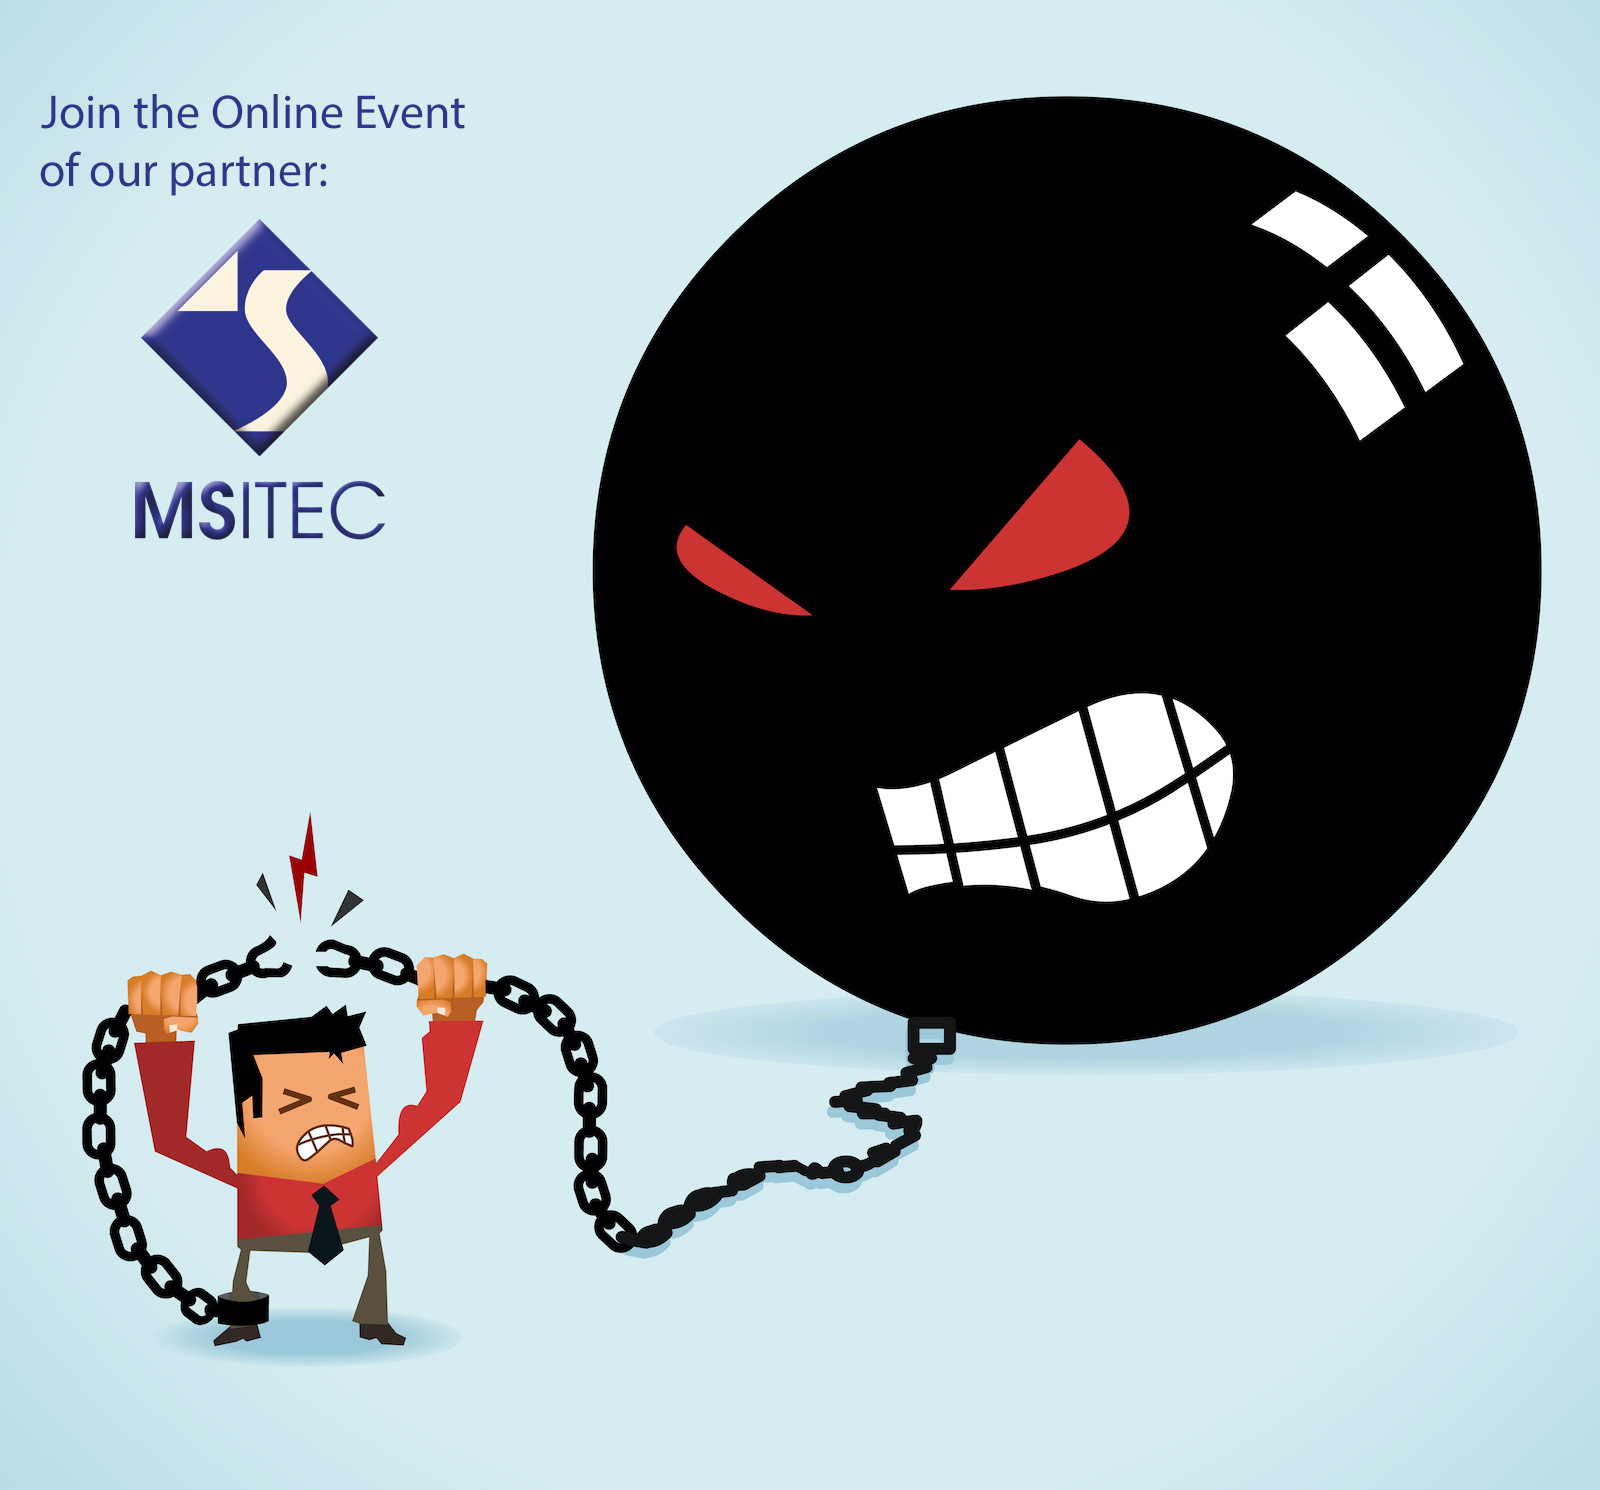 We invite you to the Open-Table discussion of our partner MSITEC!